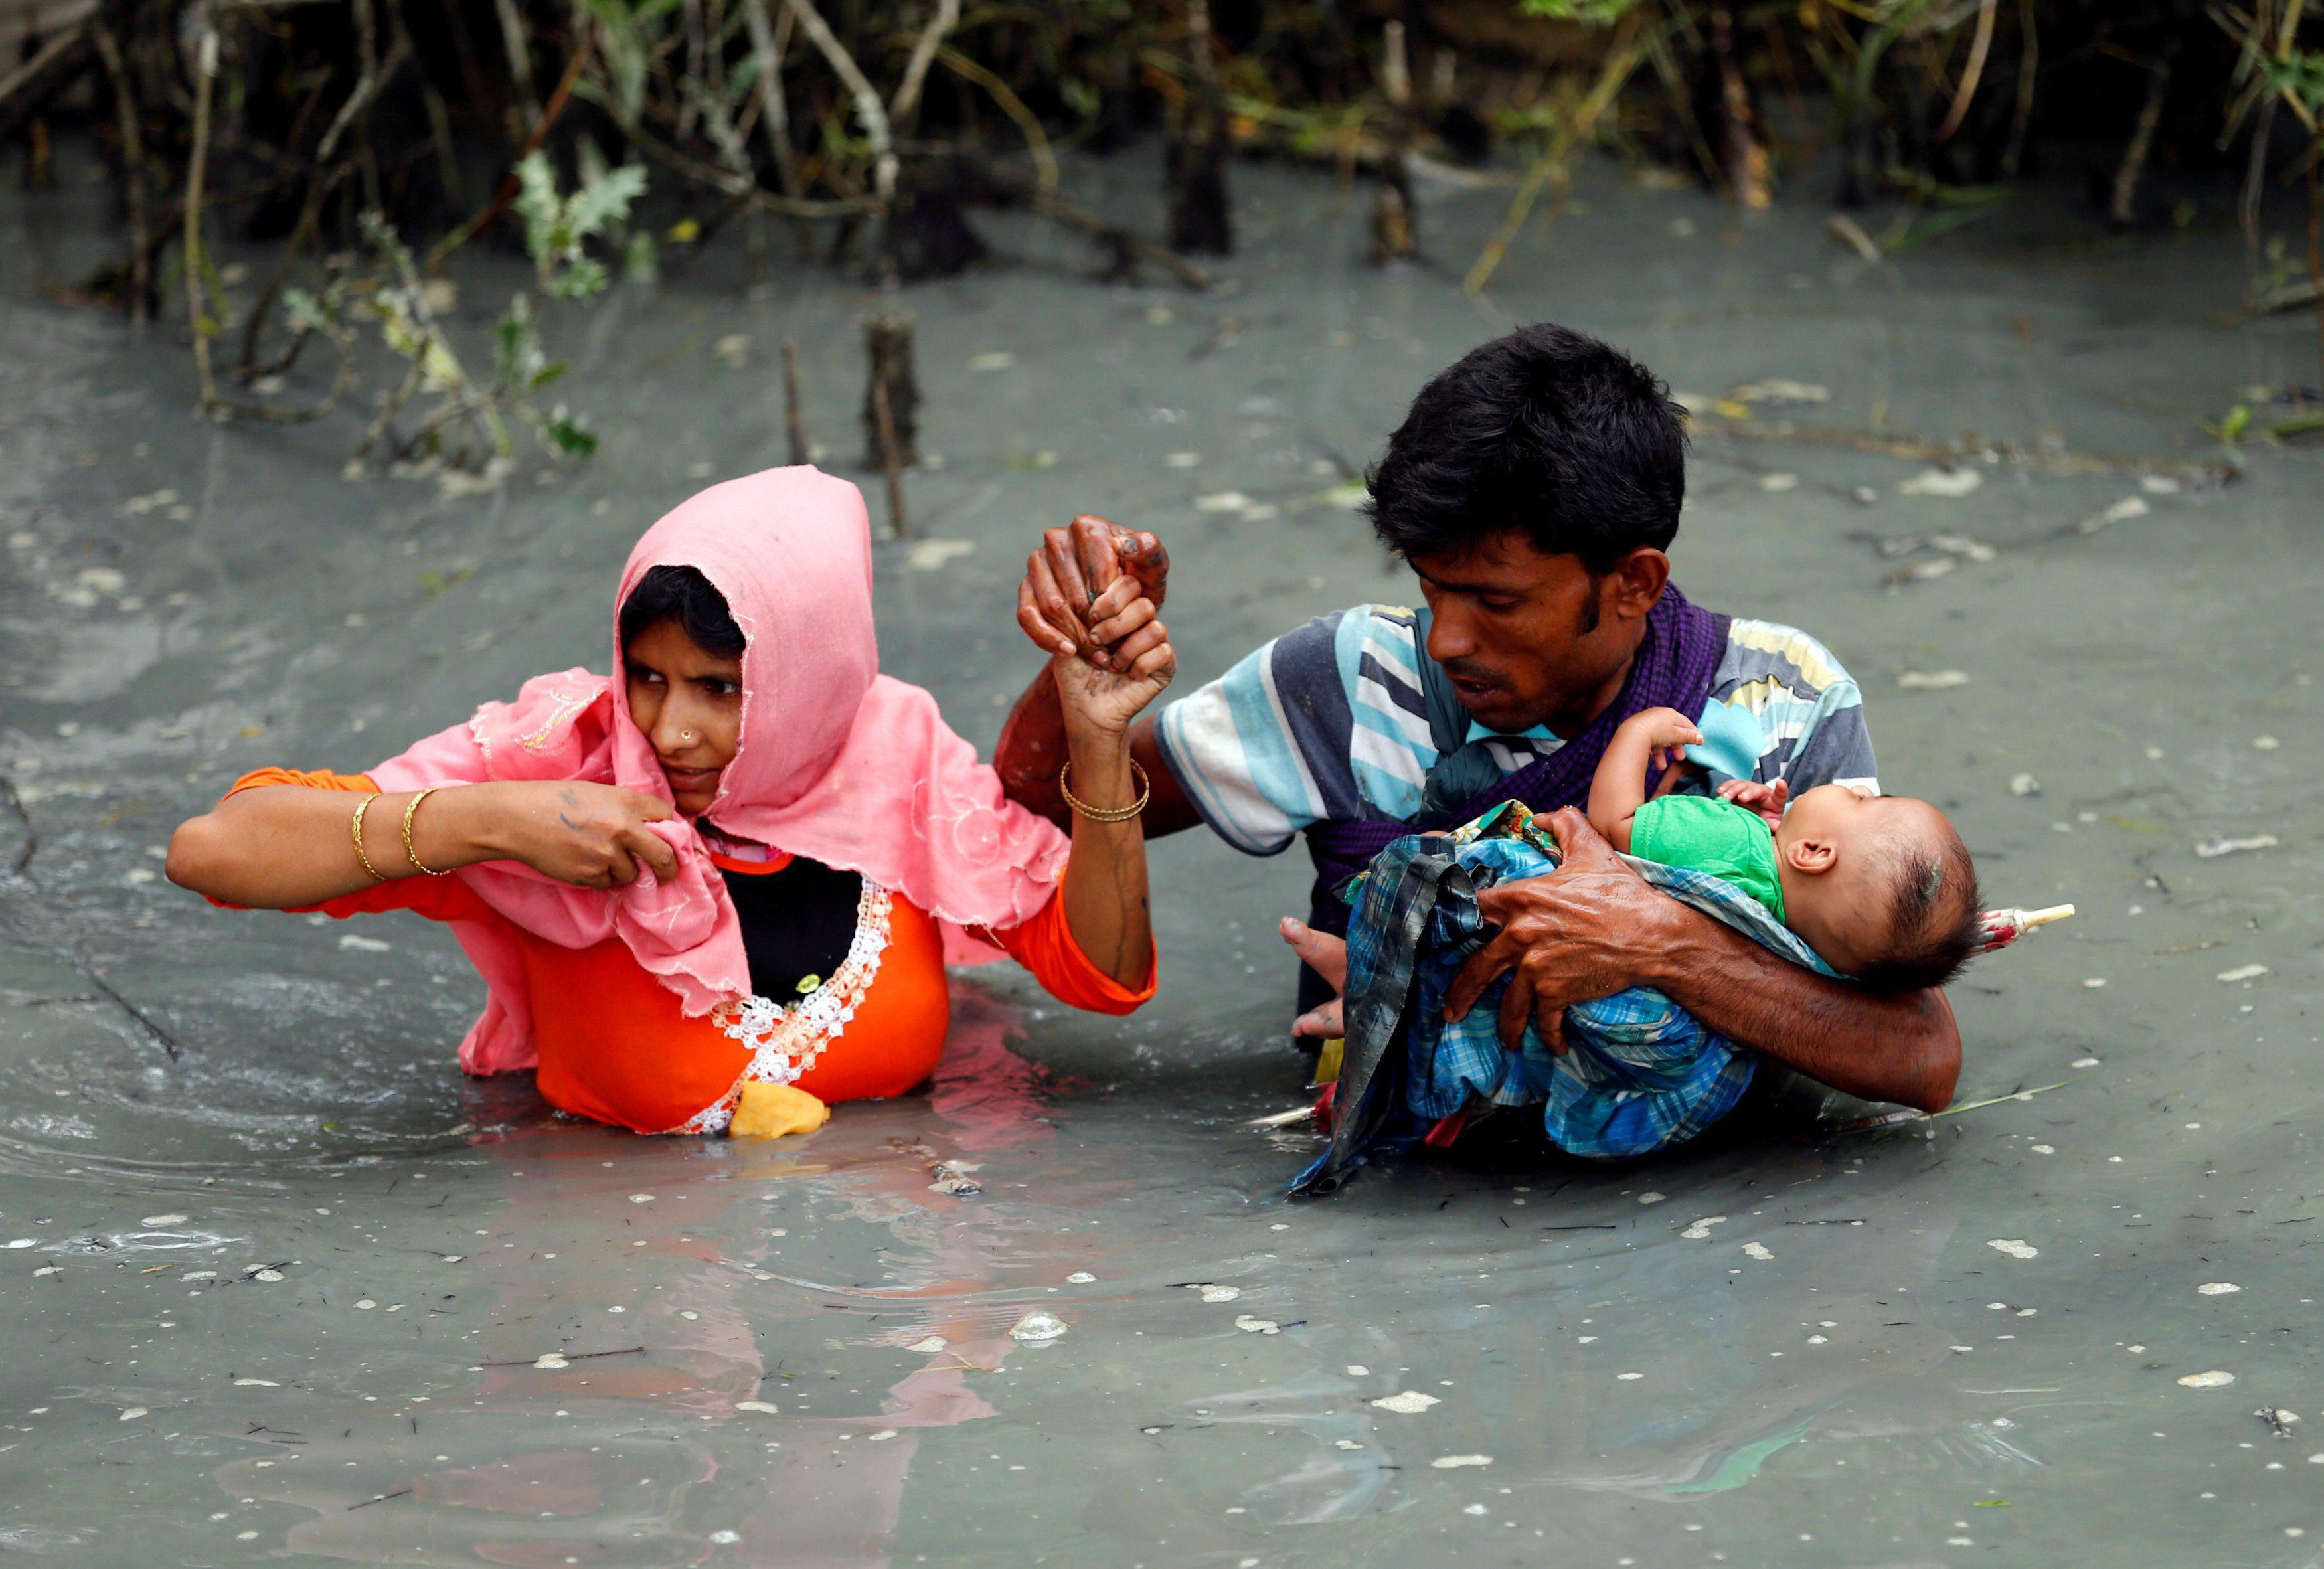 Rohingya refugees carry their child as they walk through water after crossing border by boat through